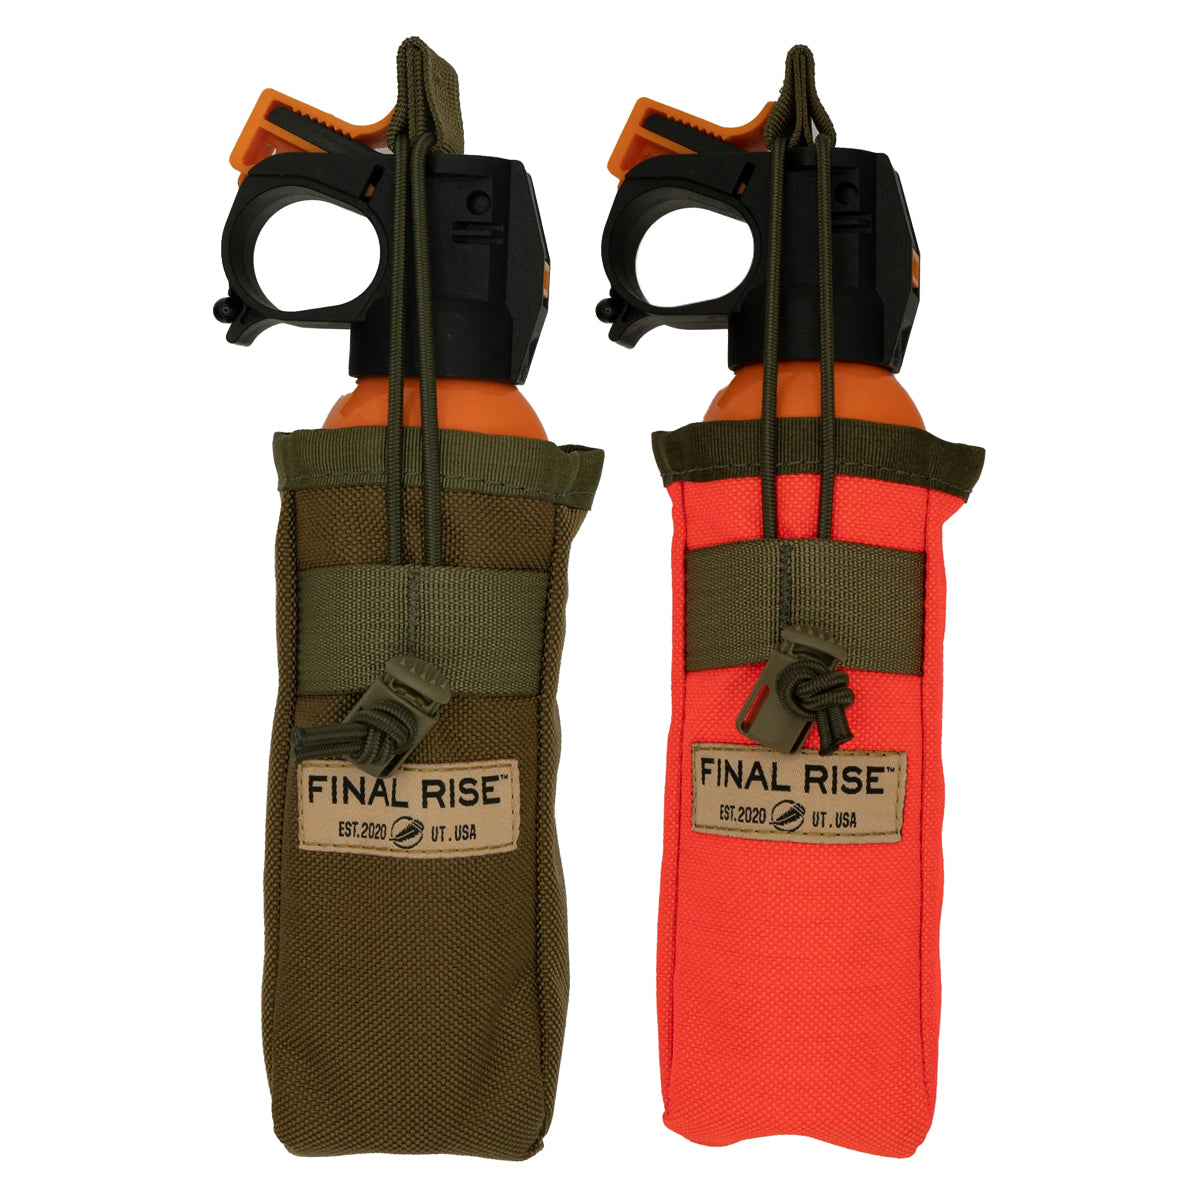 Final Rise Bear Spray Pouch in  by GOHUNT | Final Rise - GOHUNT Shop